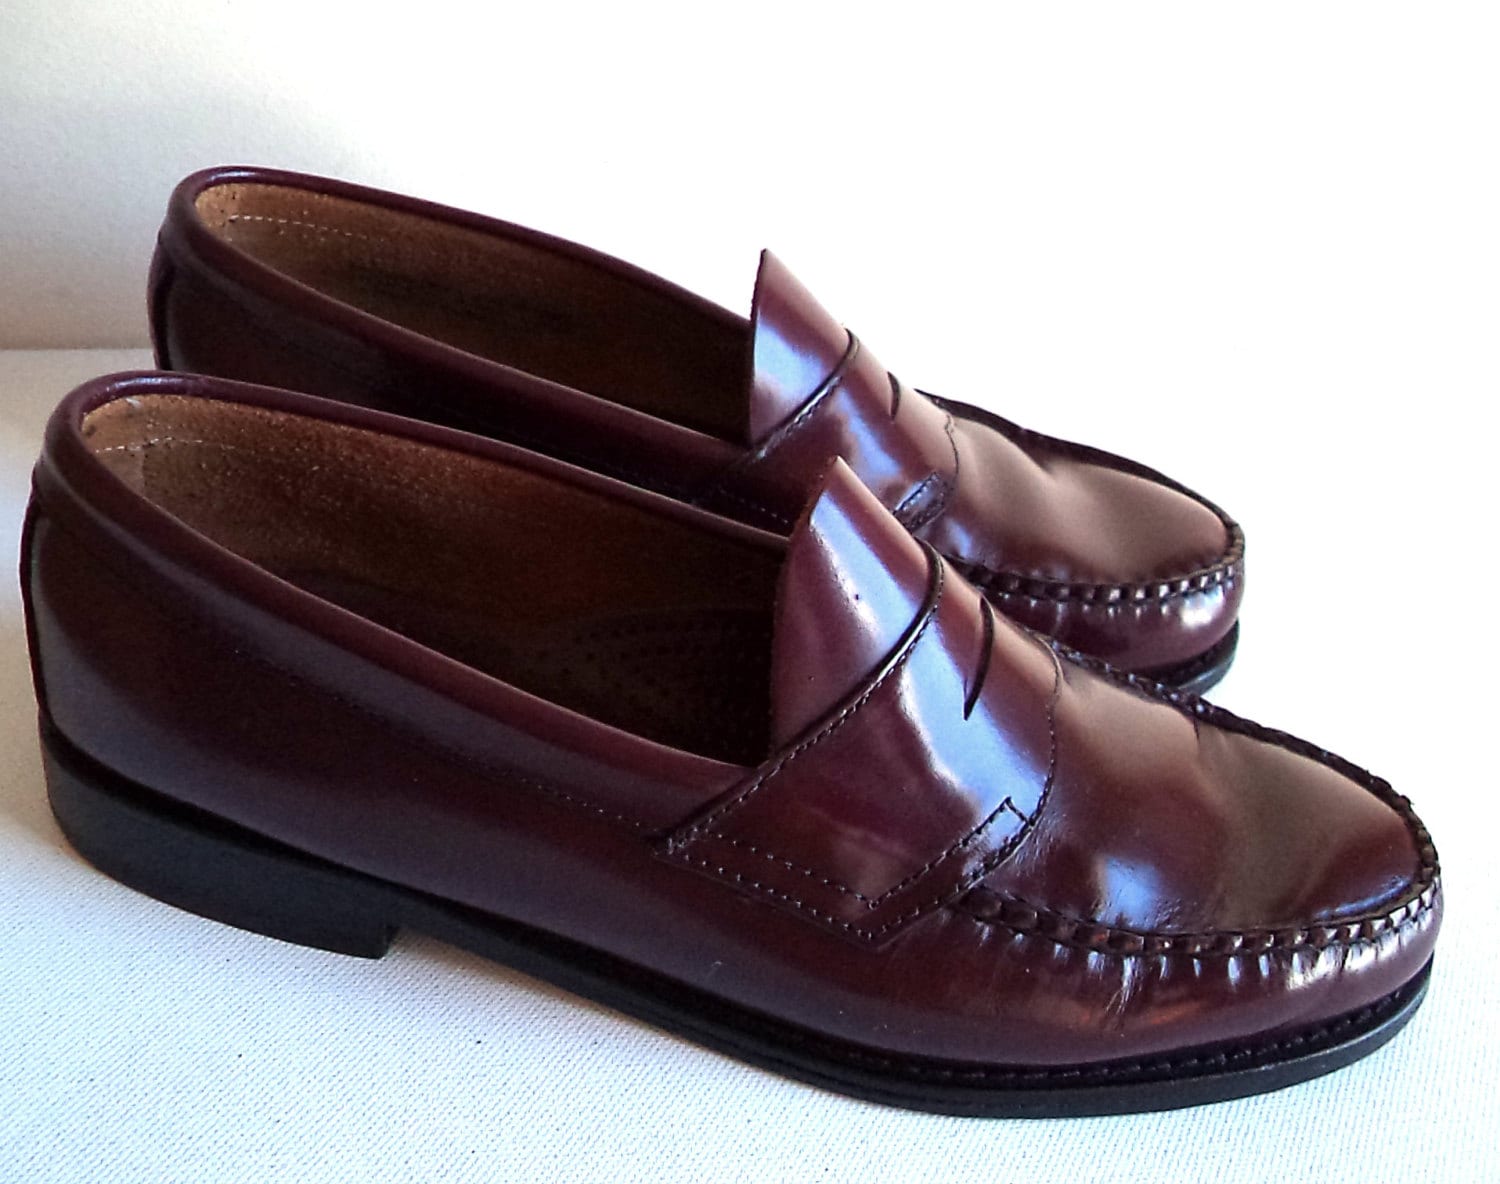 Men's 9 M BASS WEEJUNS Penny LOAFERS Refurbished Brown